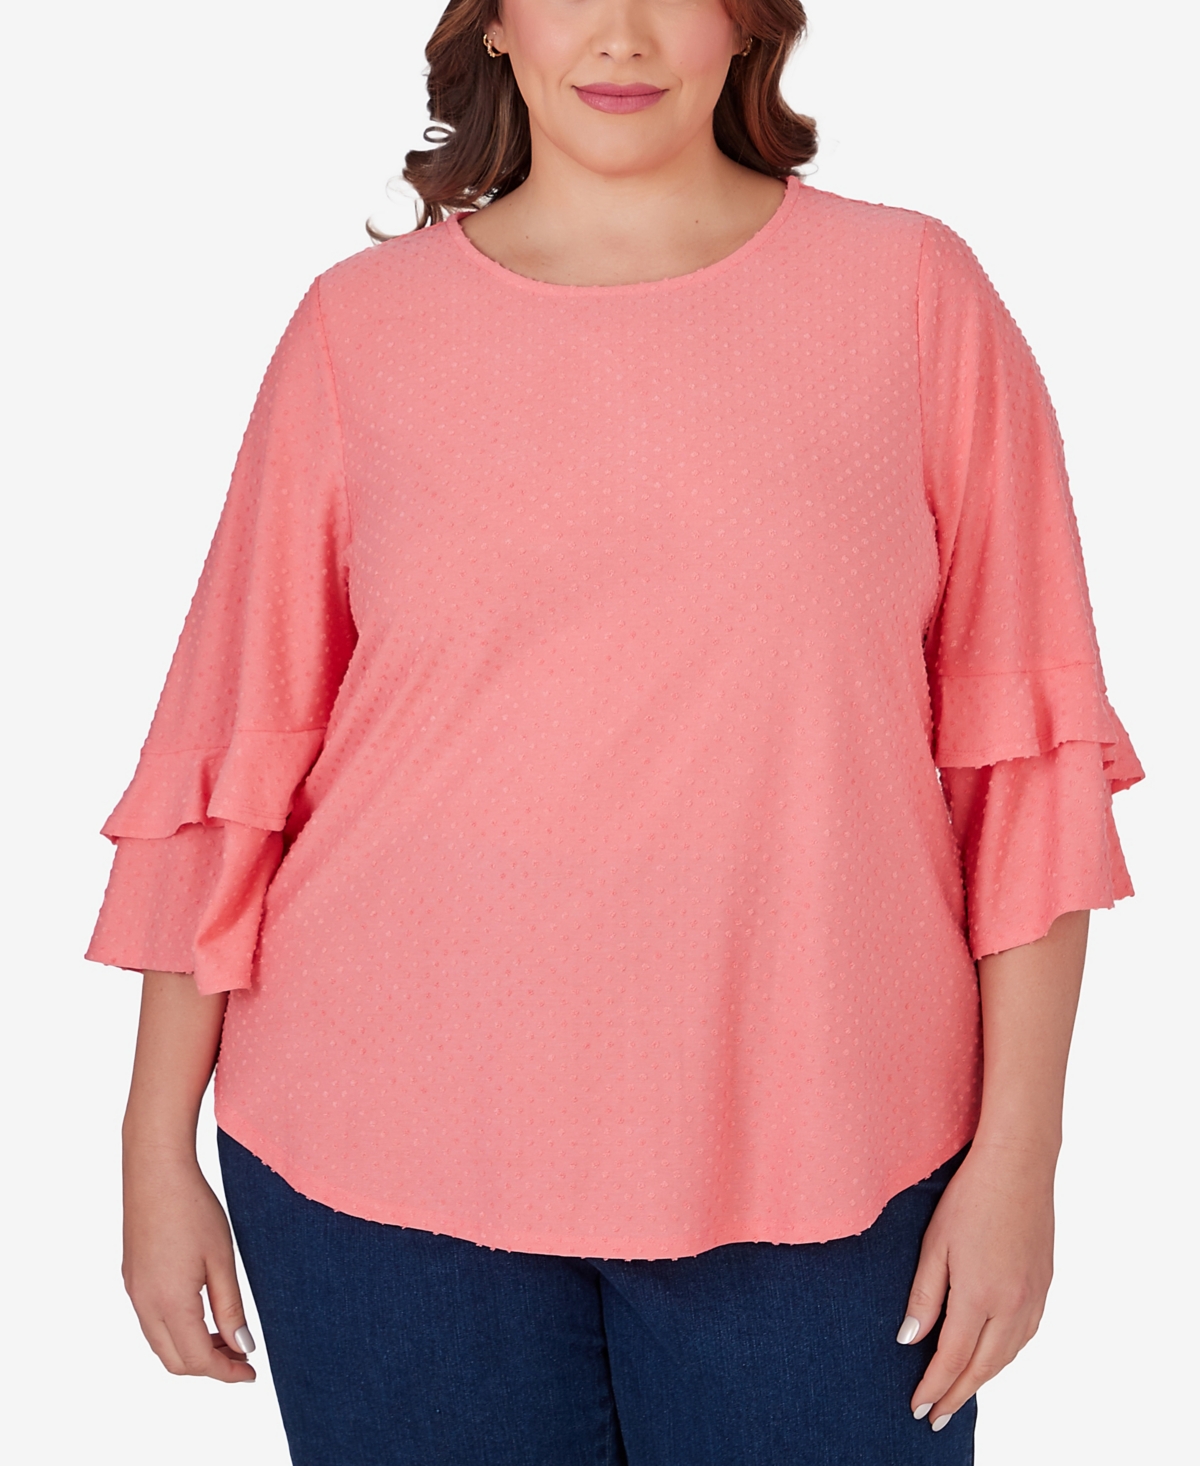 Plus Size Swiss Dot Textured Solid Party Top - Guava